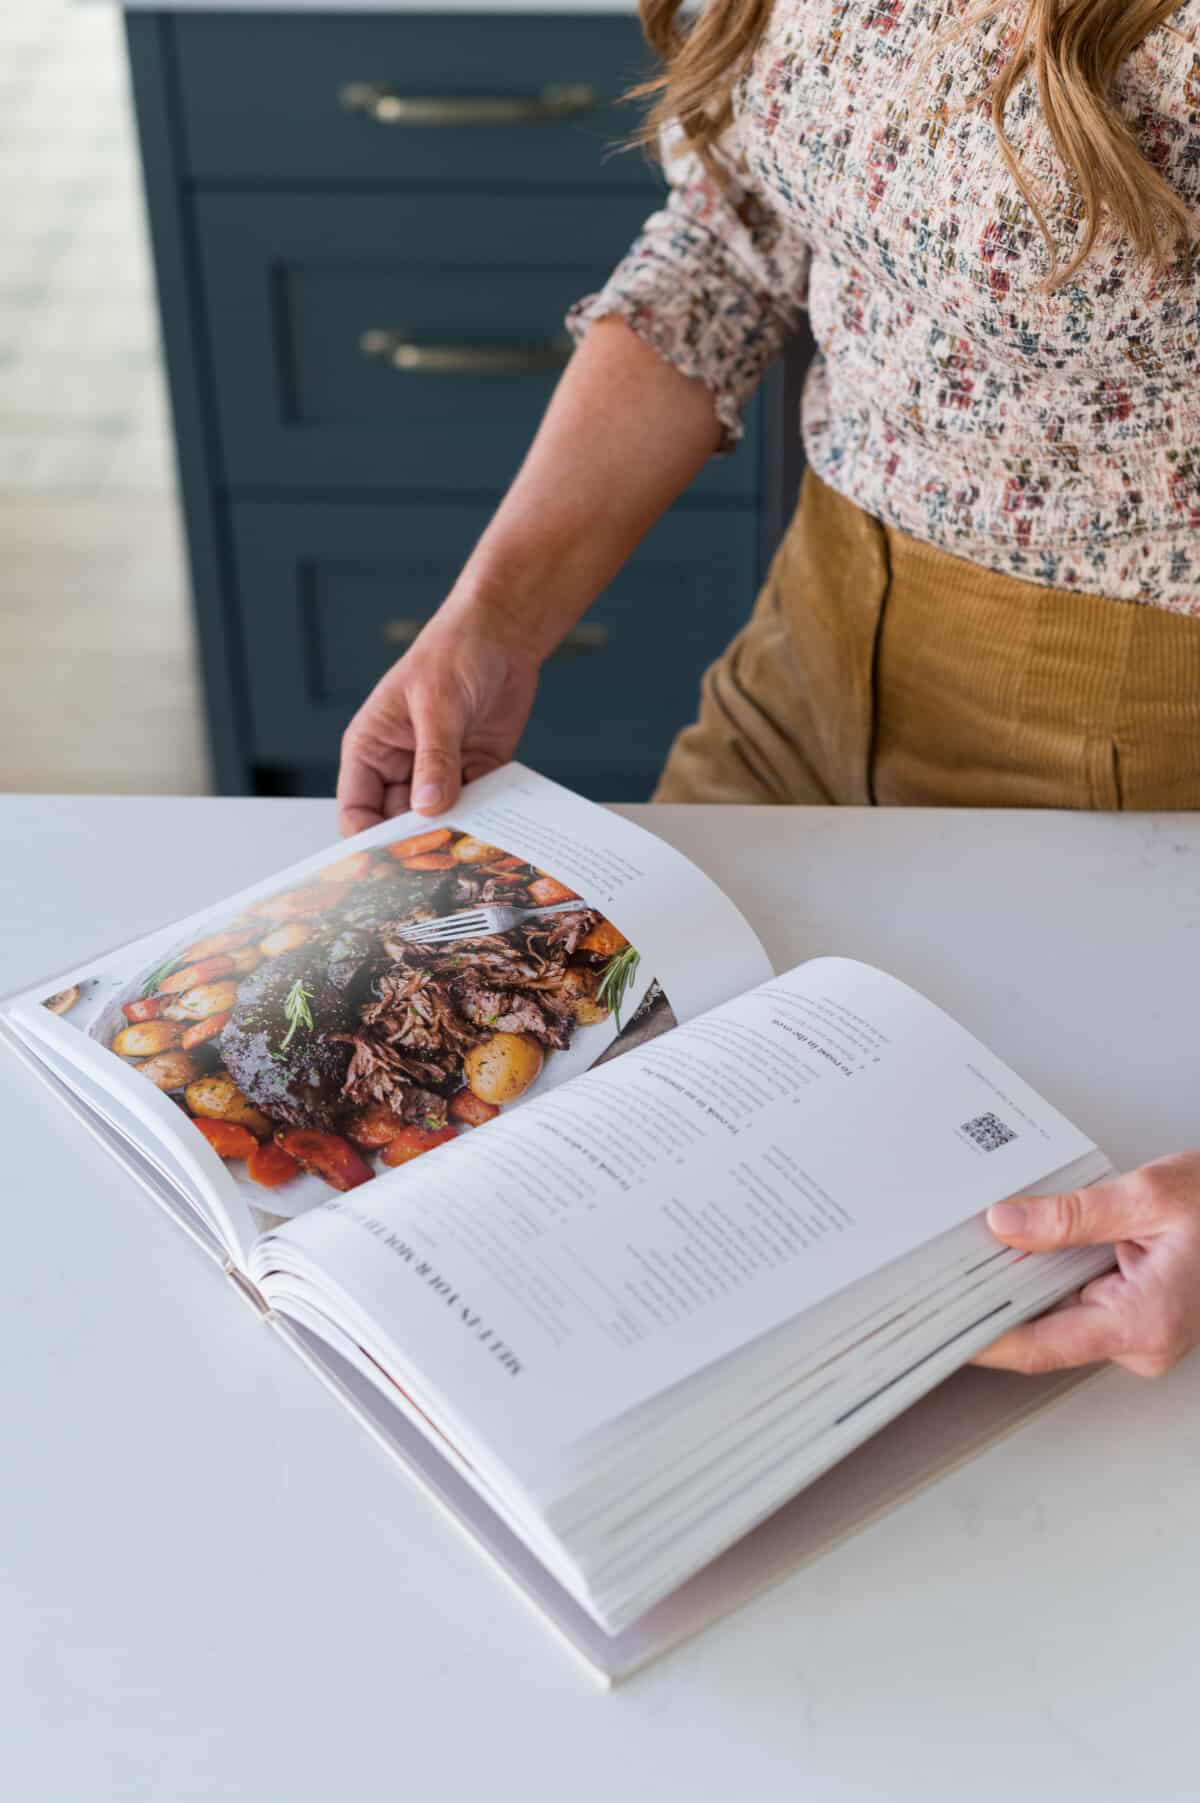 The Tried and True Cookbook on the table, open to a recipe. 